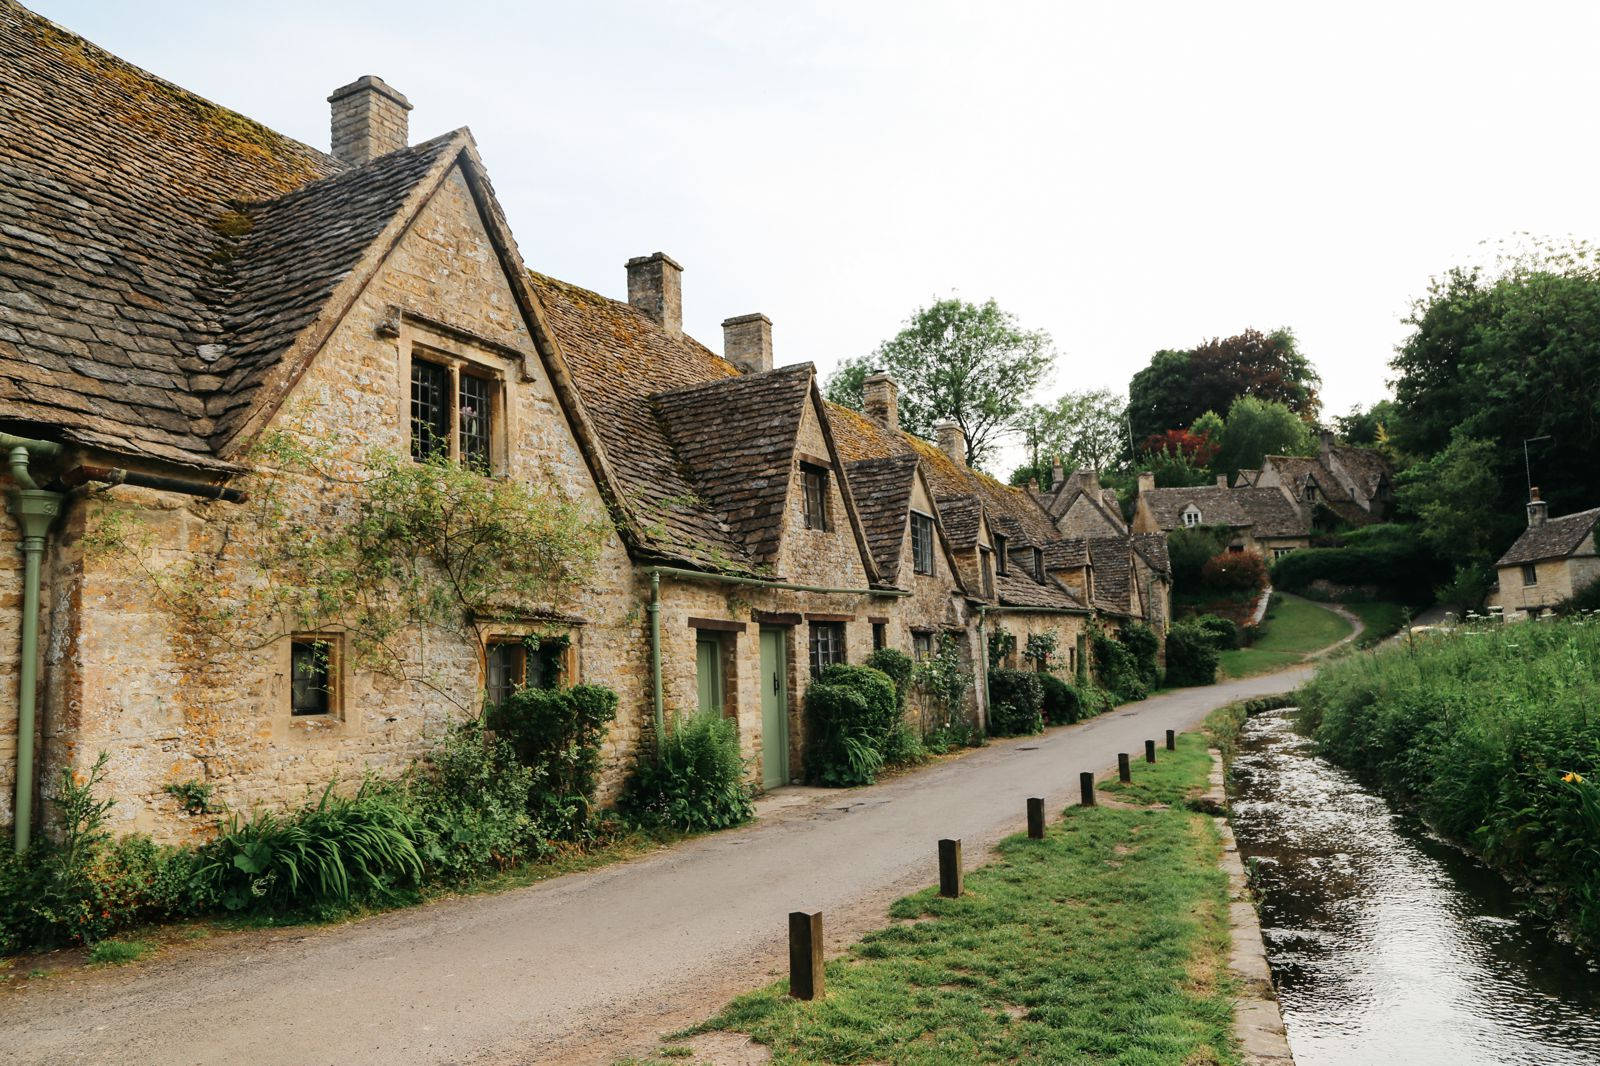 Caption: Charming Cottage Core Houses In The Uk Background